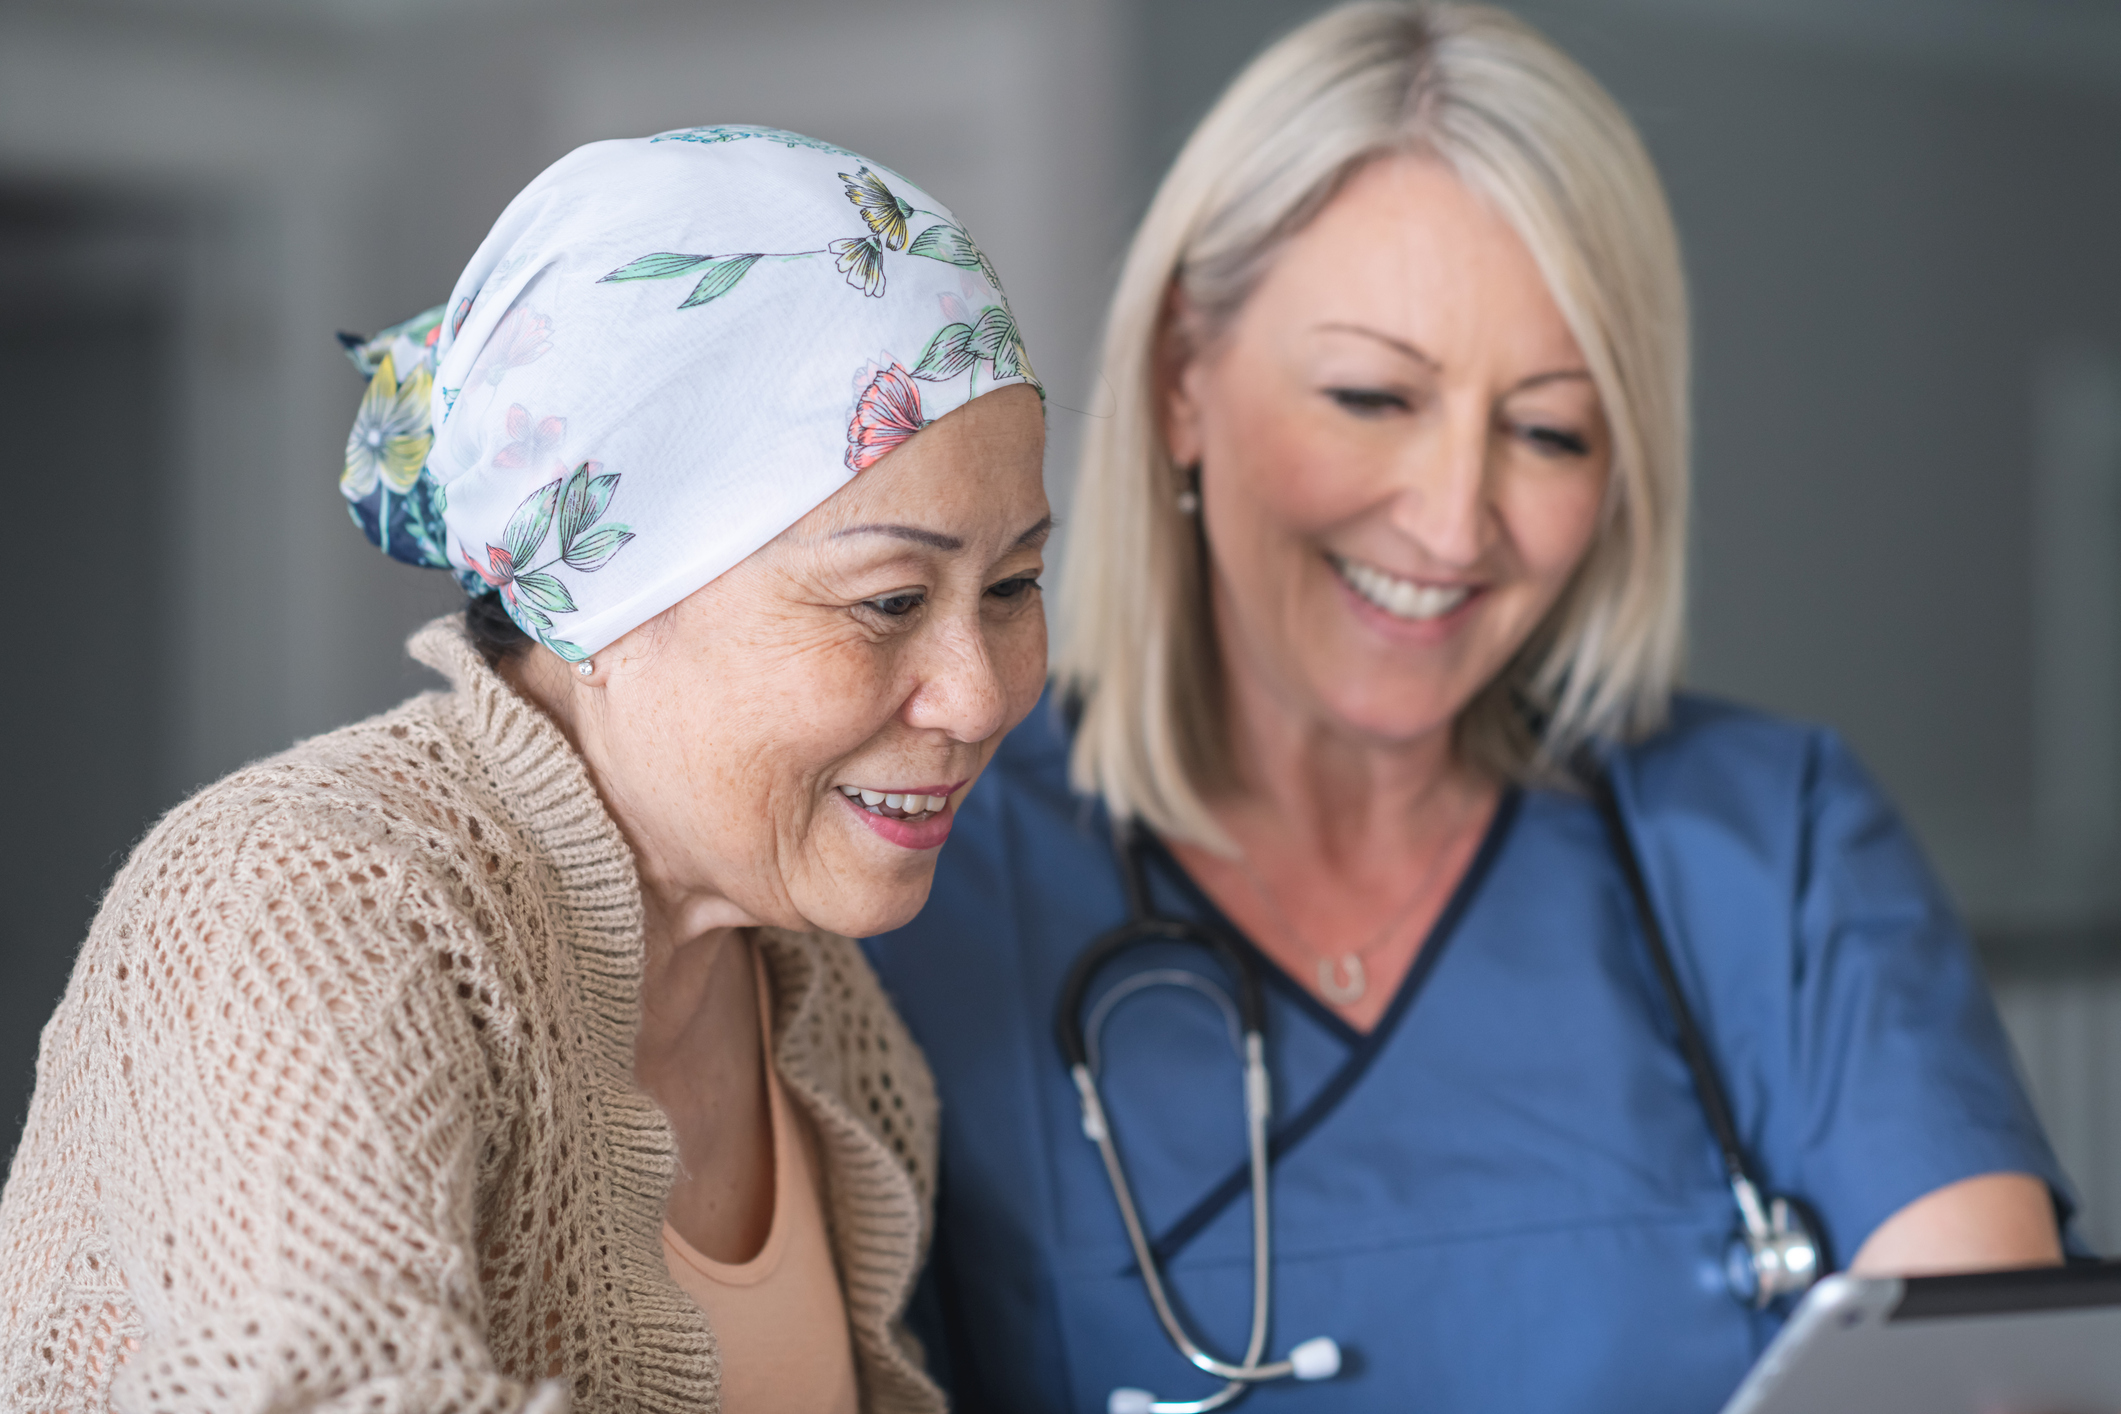 Improving care for cancer patients